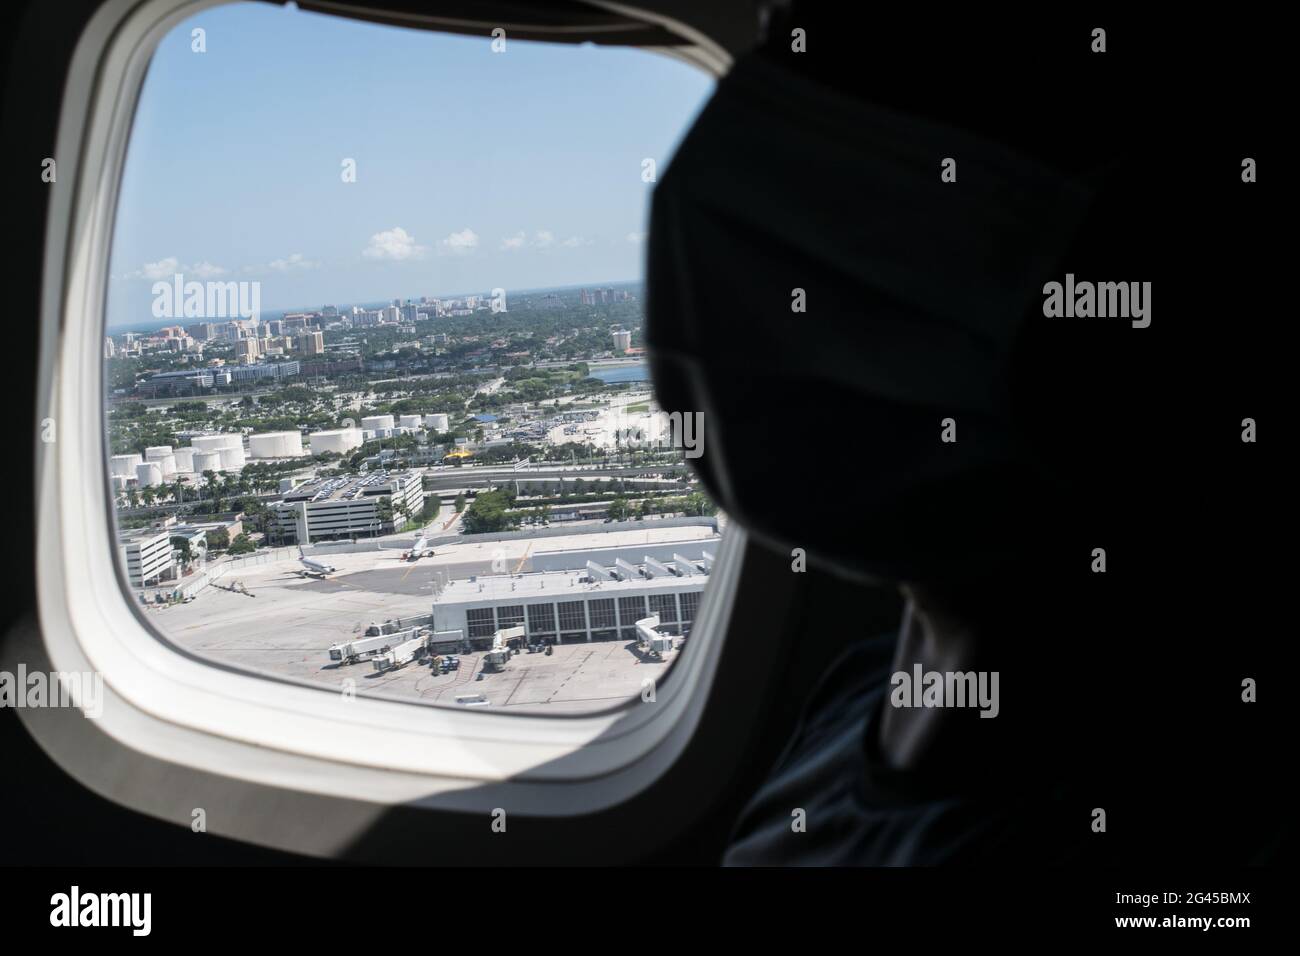 A passenger wears a protective face mask against COVID-19 as a view of grounded planes at Miami International Airport as the Colombian government sponsored free repatriation flights back to Colombia admist the novel Coronavirus (COVID-19) outbreak and the result of commercial flights grounded, in Miami, Florida, U.S, on August 7, 2020. Stock Photo